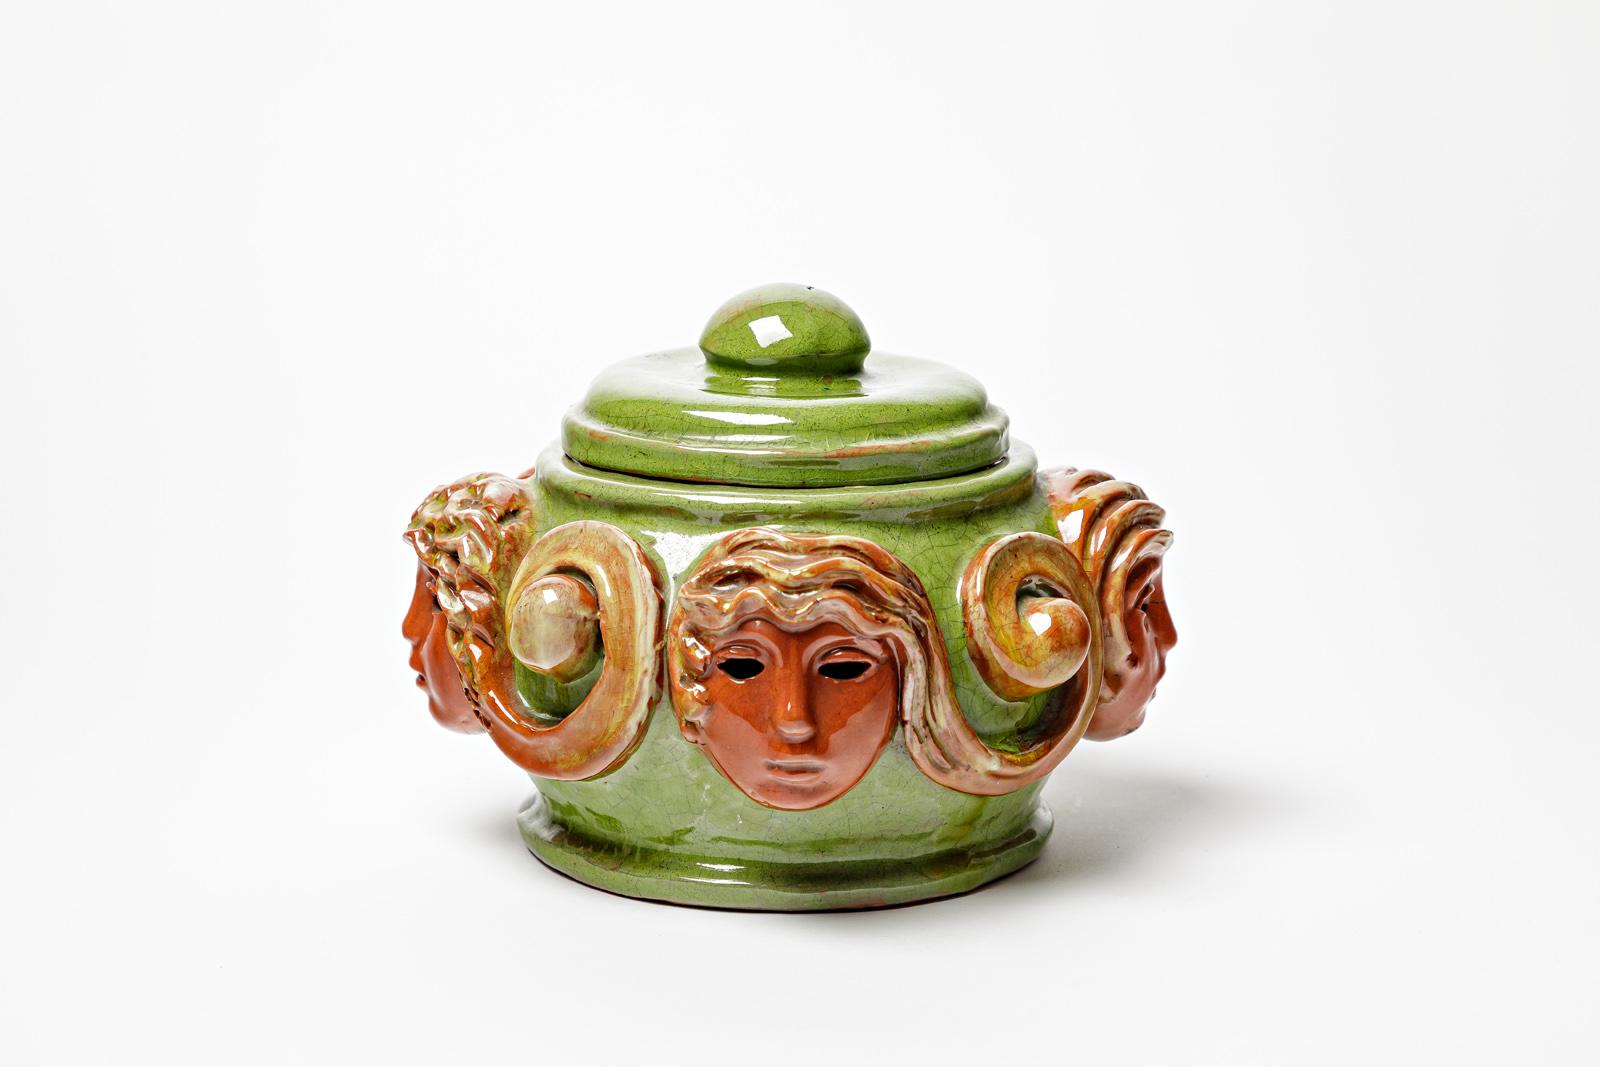 Attributed to / in the style of Paul Pouchol

Large art decorative ceramic box

Orange and green ceramic glazes colors

Original perfect condition

Signed under the base

Realised circa 1940

Height 16 cm
Large 21 cm